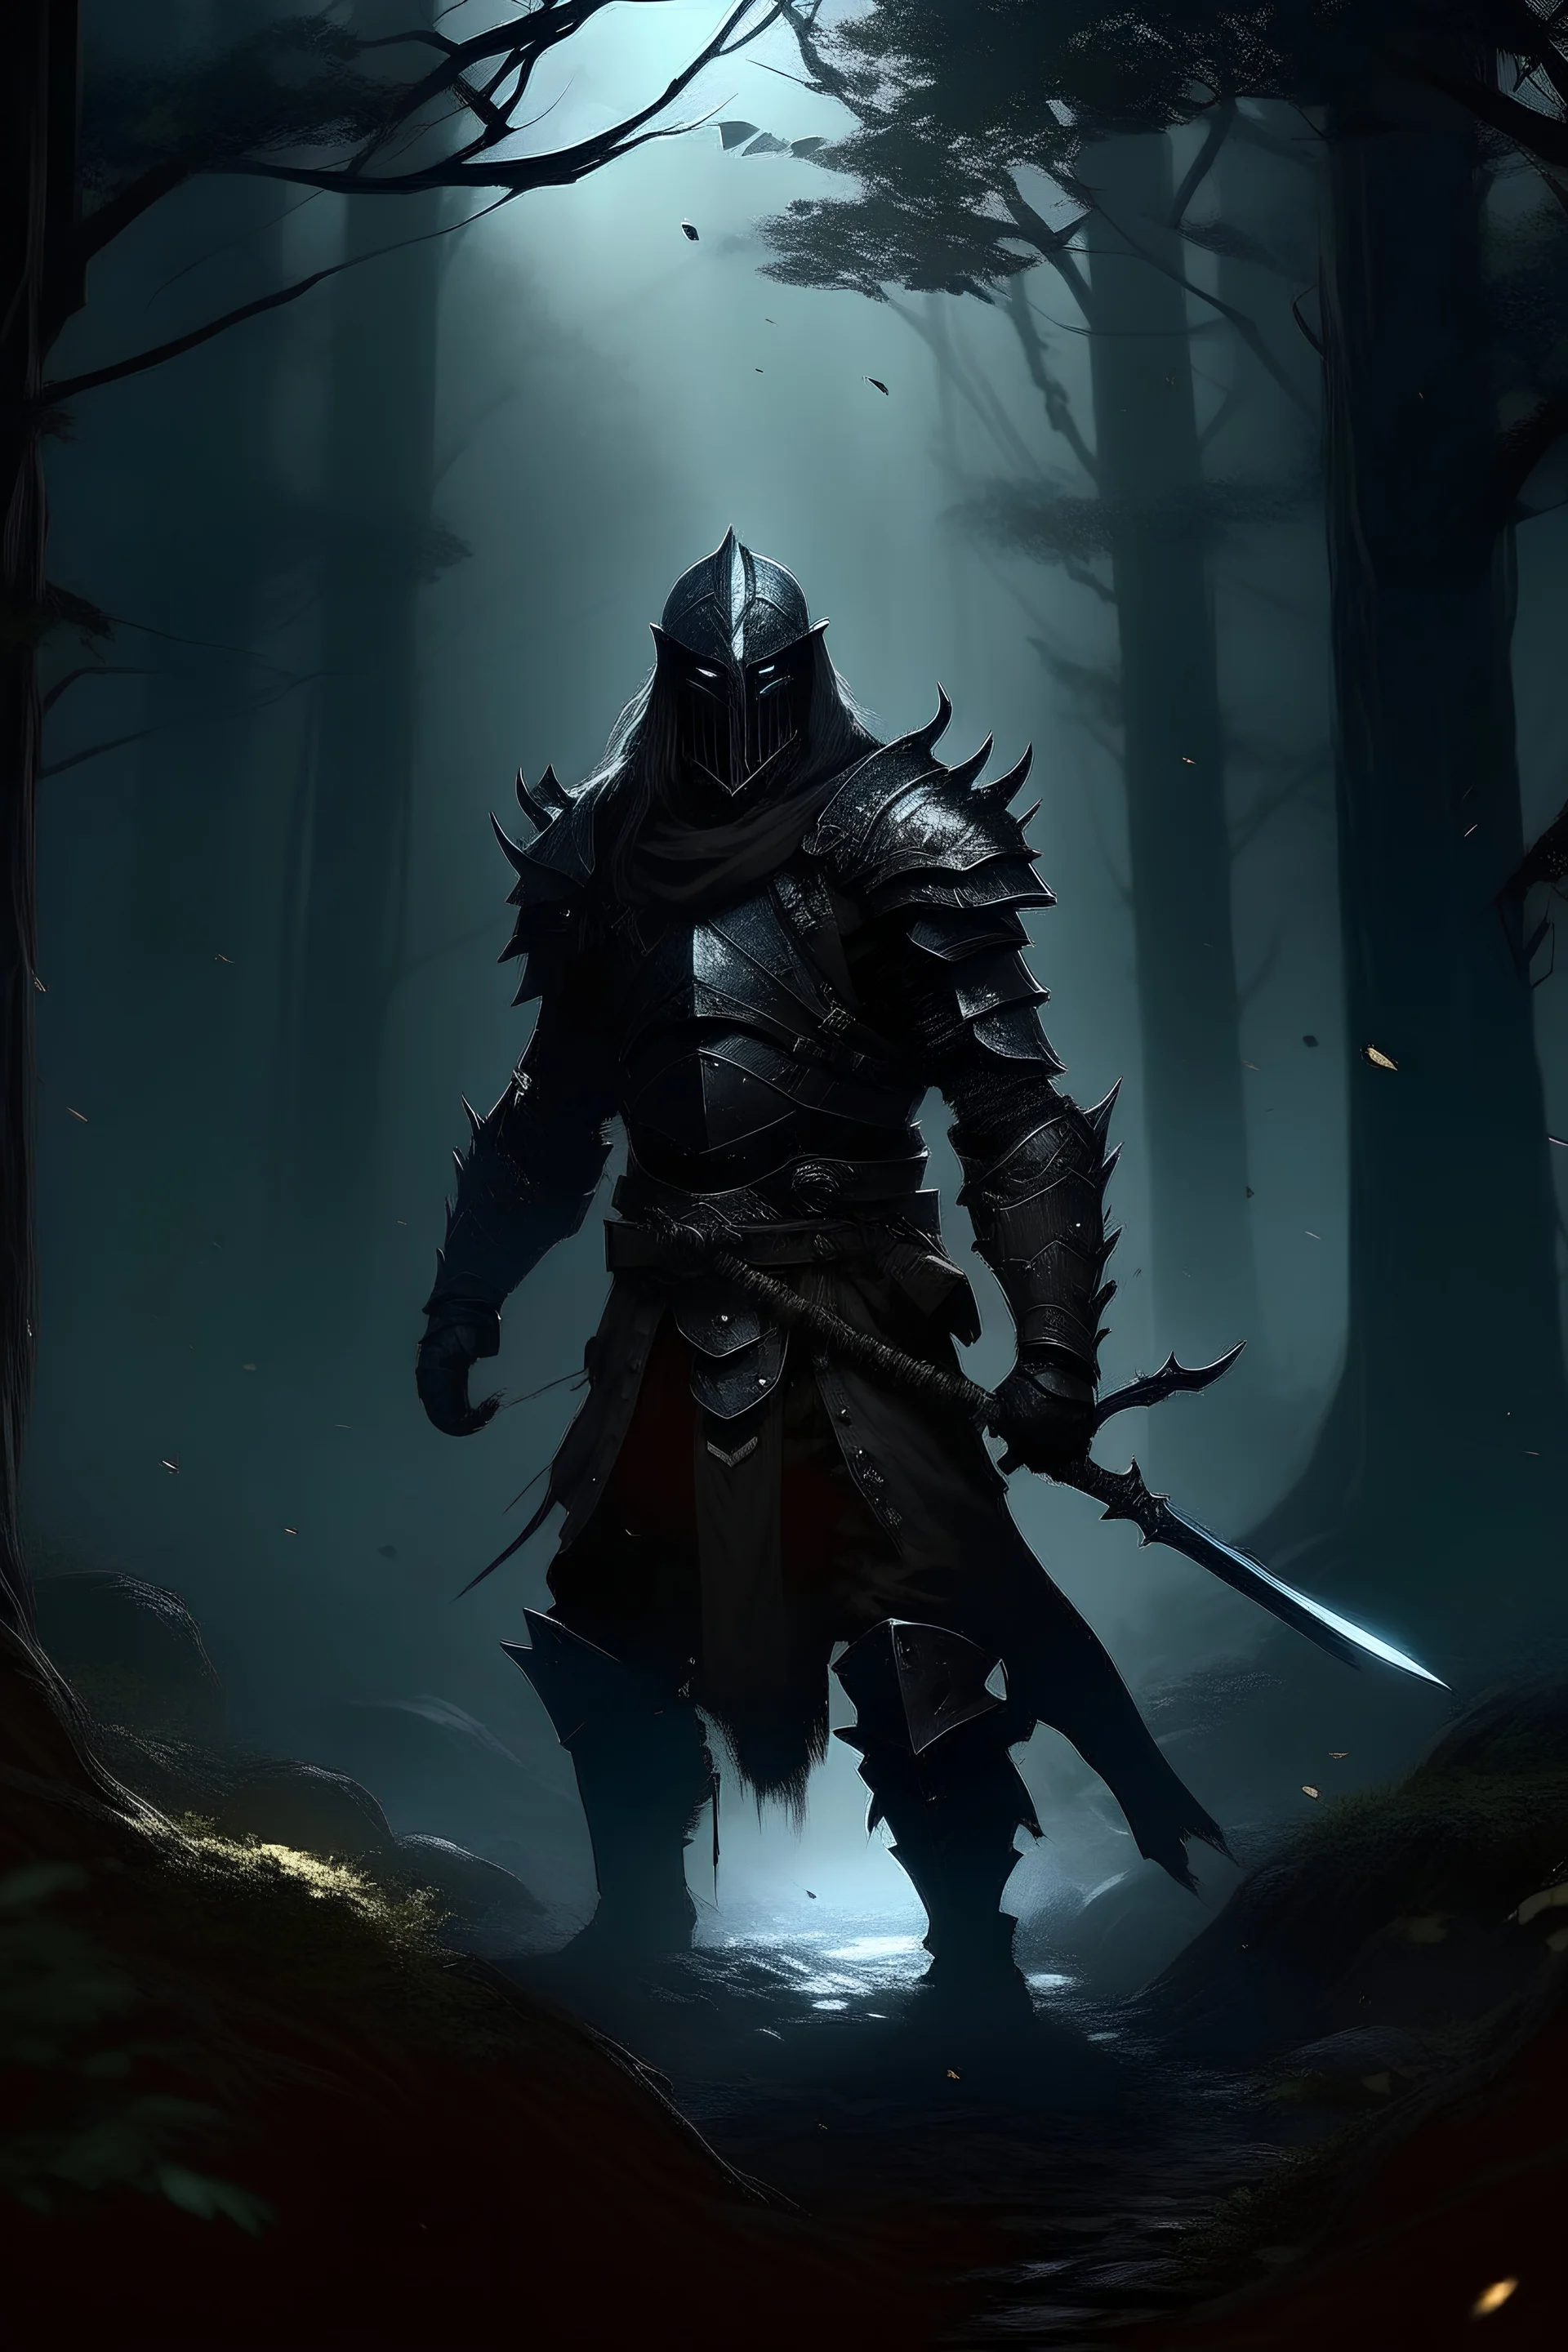 a dark hero charachter, wearing a dark mythic armour, sci fi weaponsied, with swords and guns, walking through cold and windy forest region, dramatic,